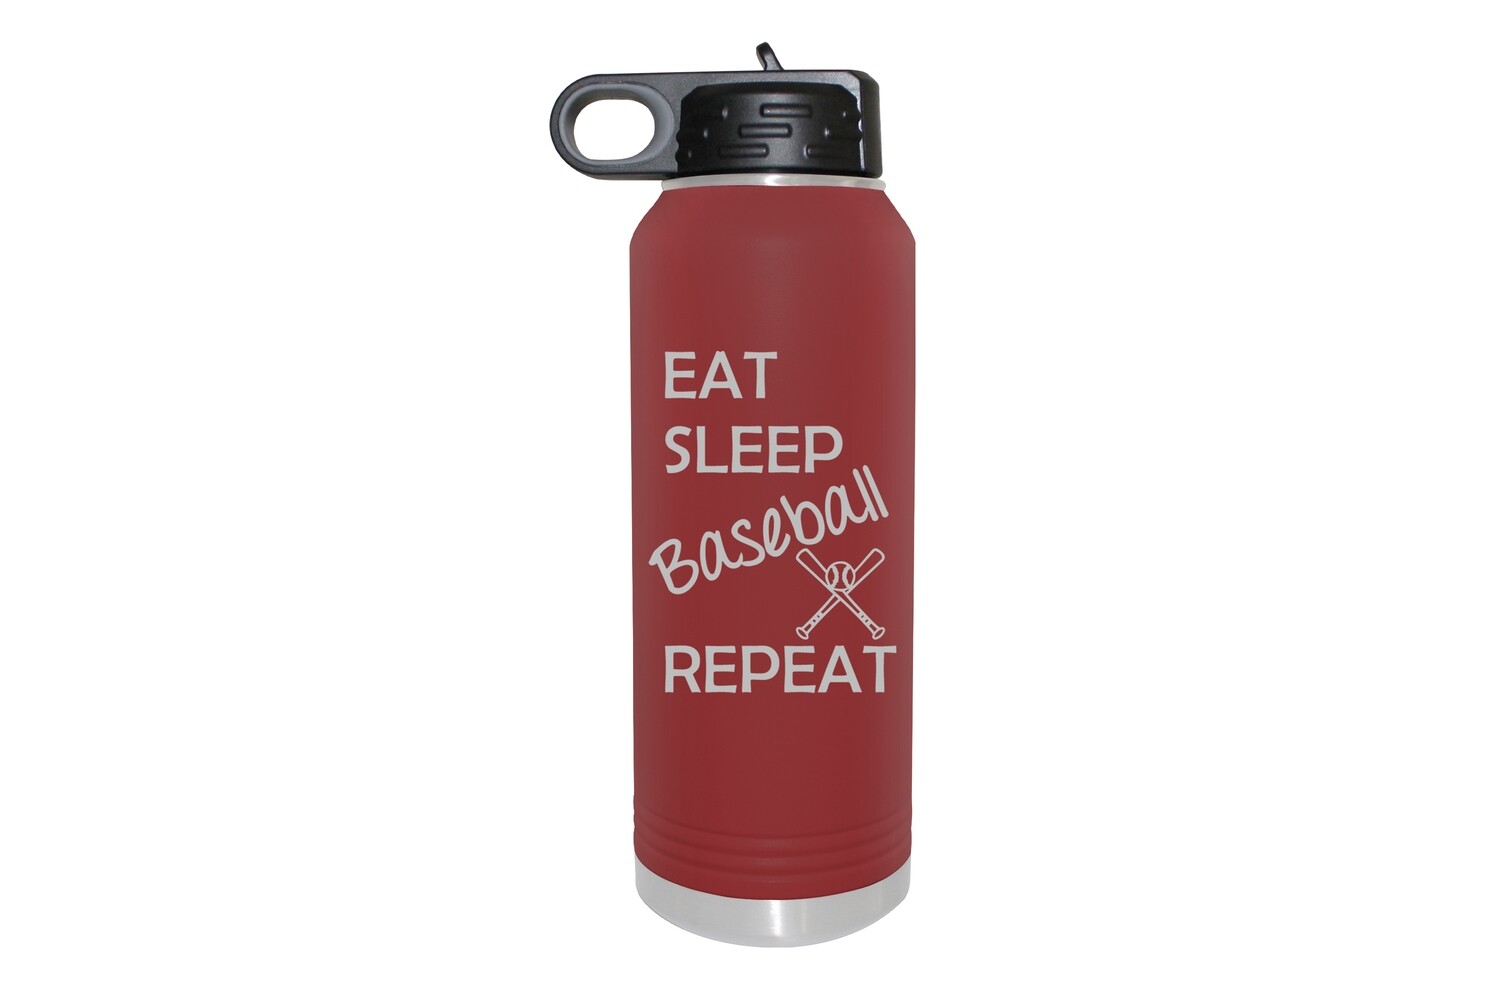 Eat Sleep (Choose from 19 Sports) Repeat Insulated Water Bottle 32 oz